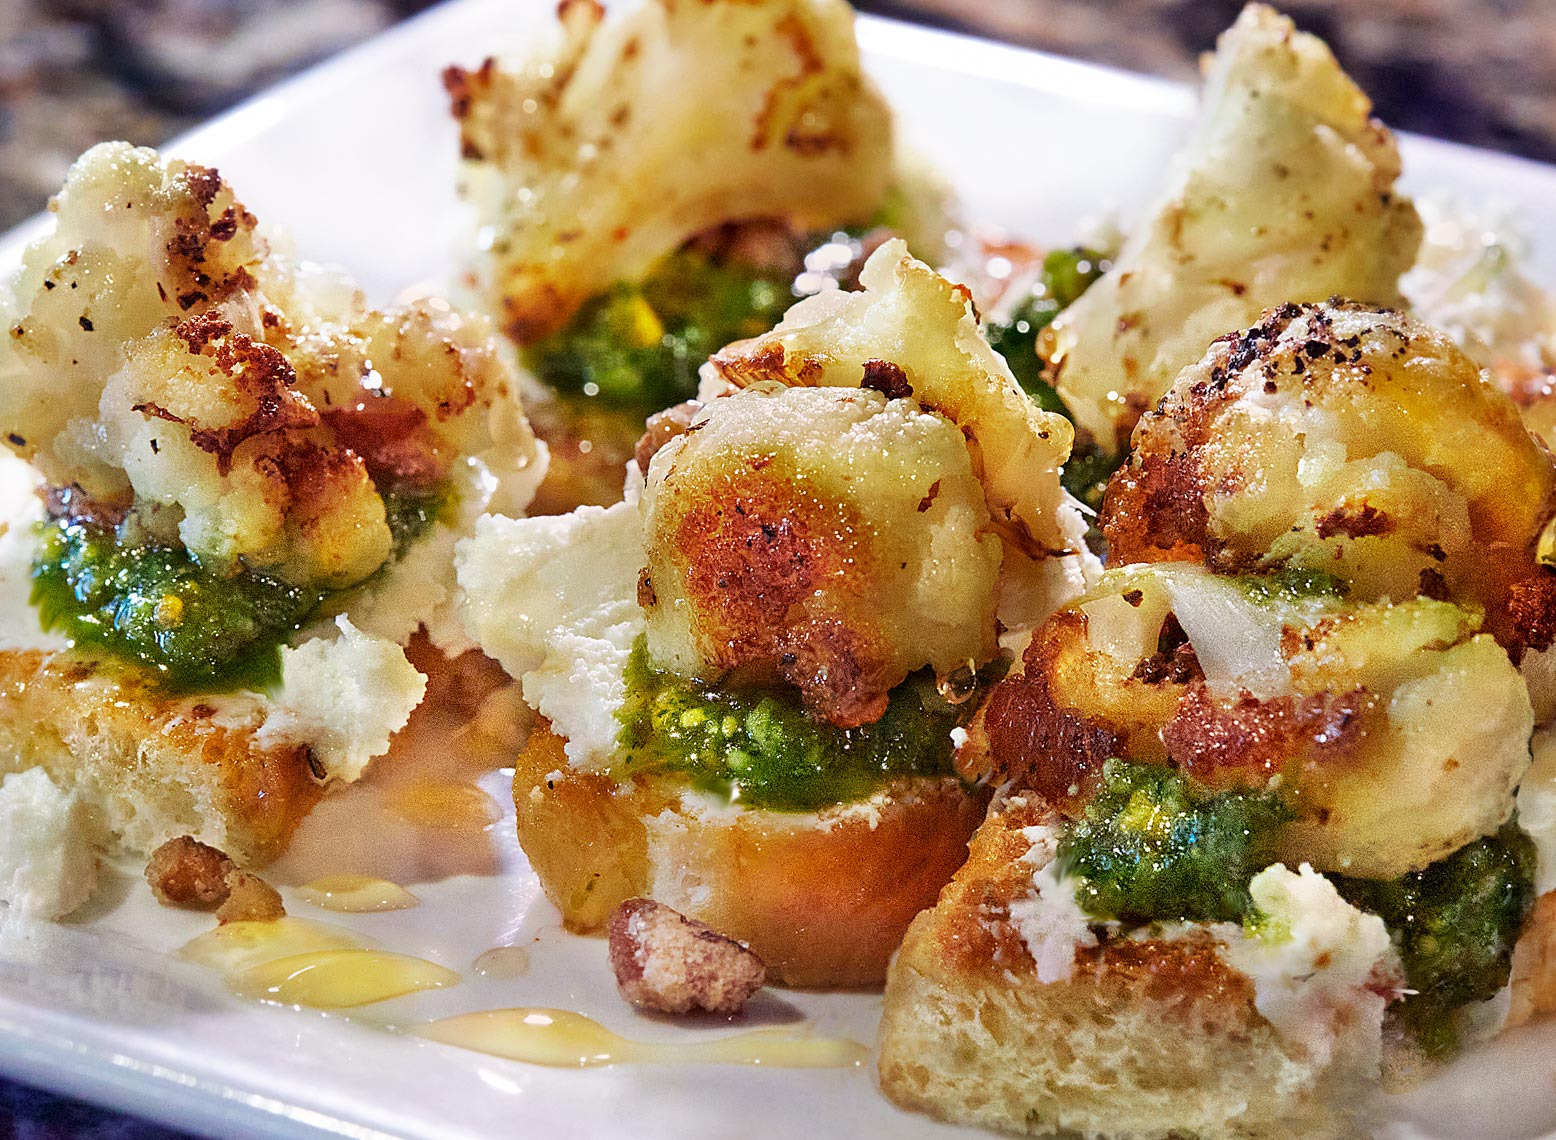 Pan roasted cauliflower seasoned with fresh herbs and sea salt, served on grilled focaccia crostini, whipped goat cheese, pistachio pesto, candied nuts and local honey at The Chef and I restaurant in Nashville Tennessee